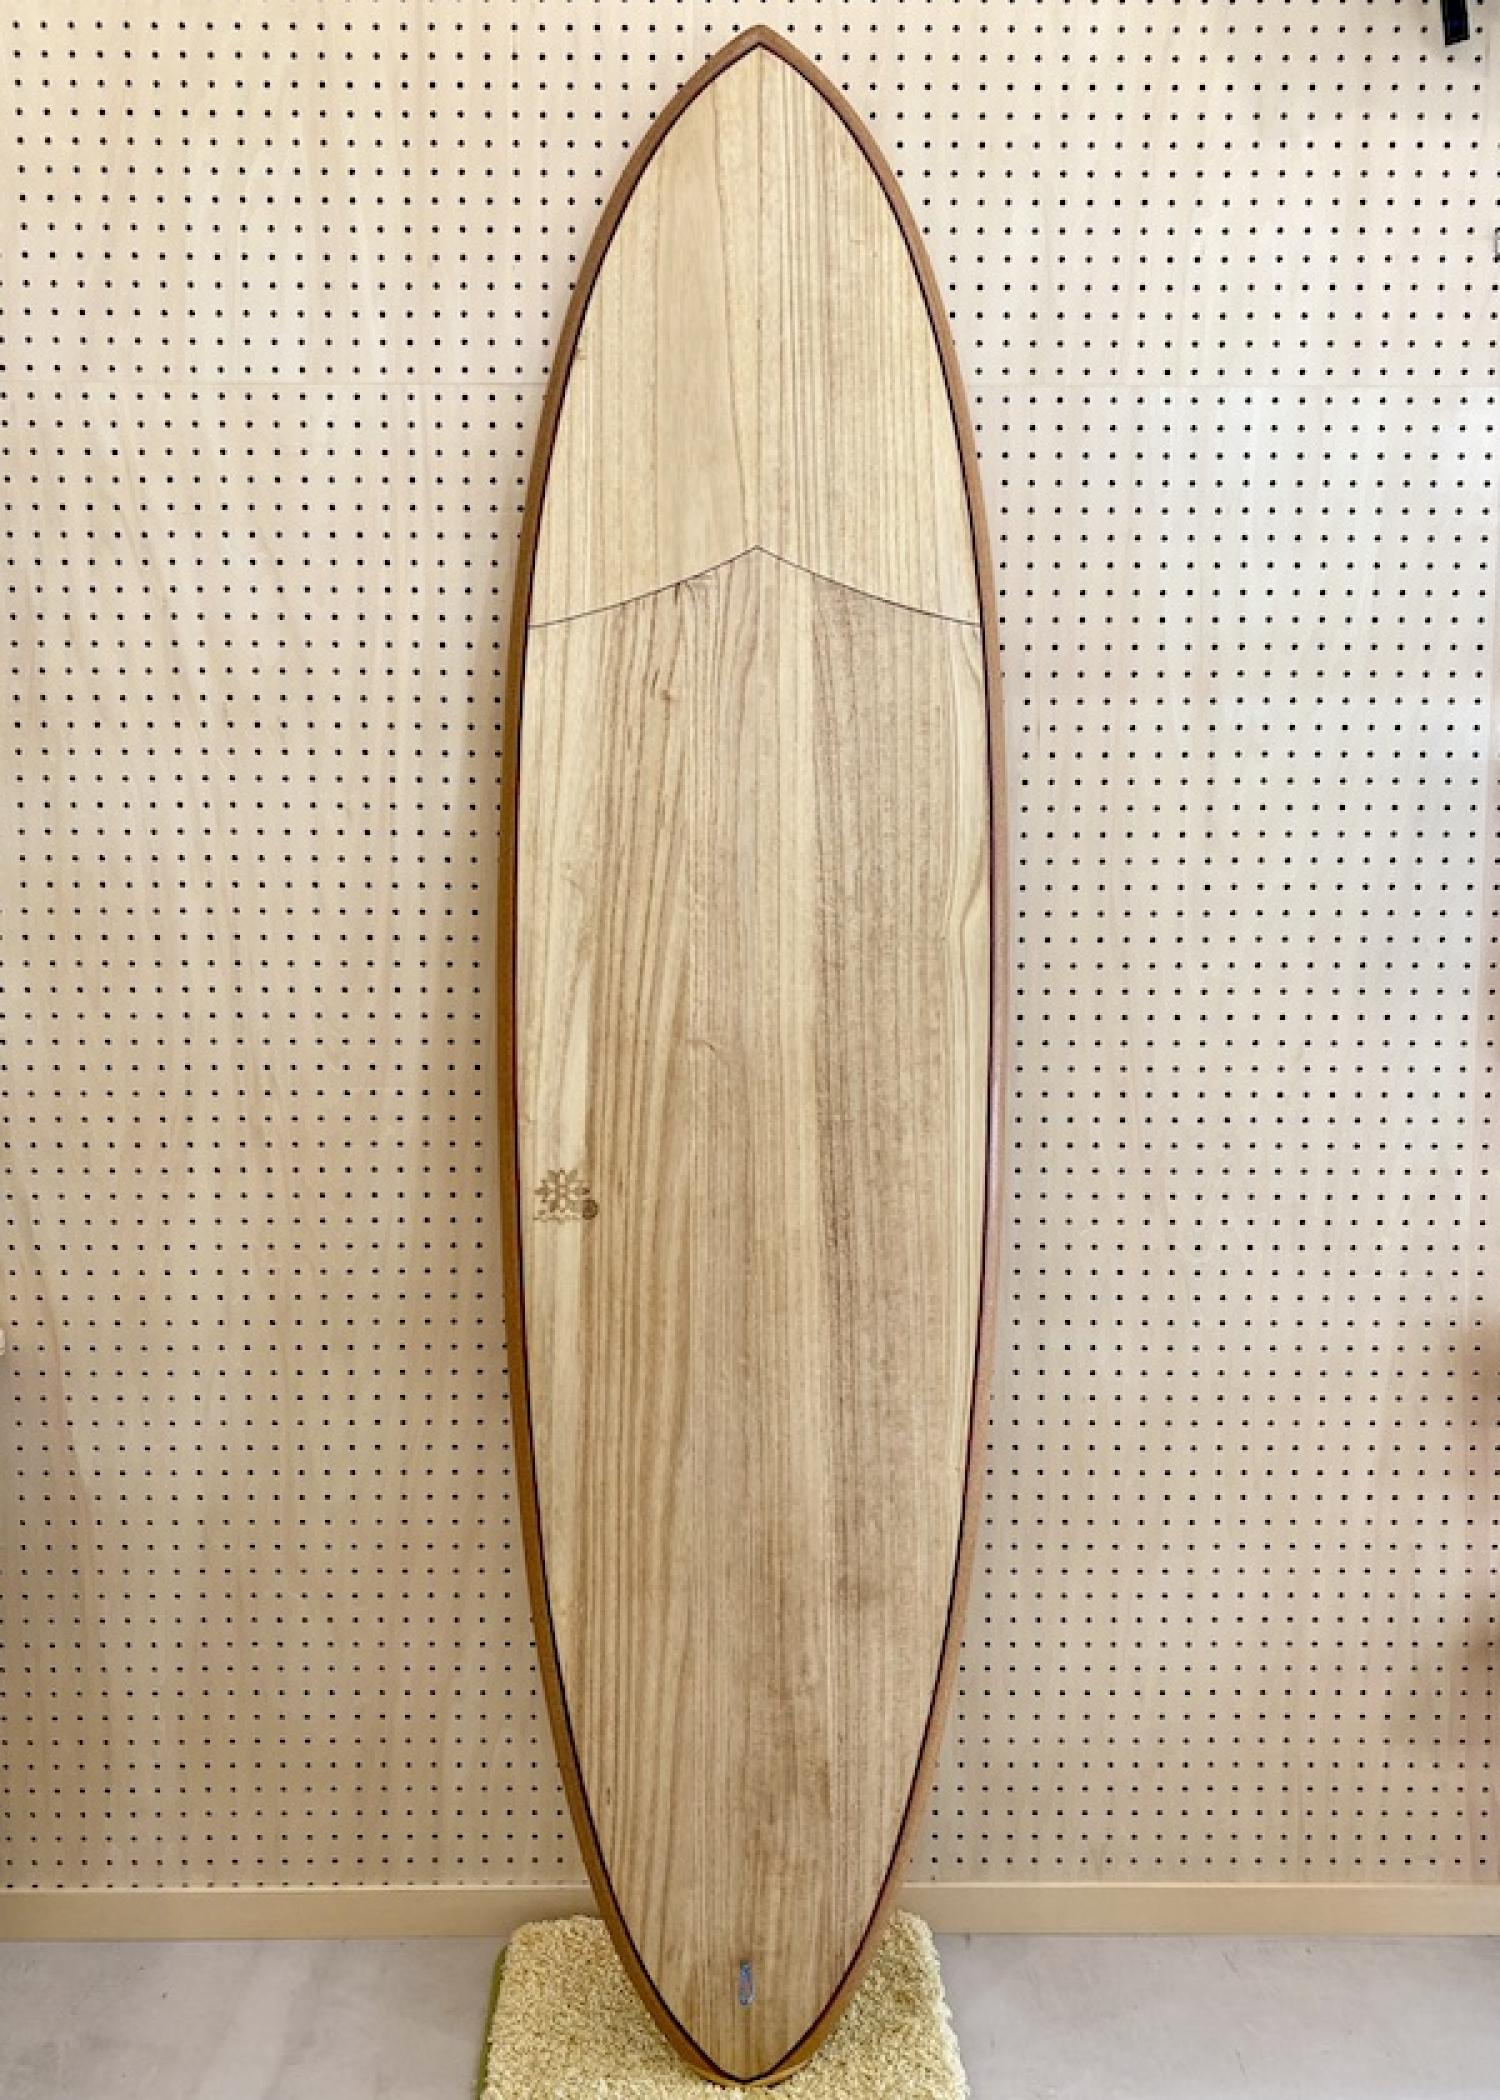 USED(Rice Ball 7.2 LASCA WOODWORKS )